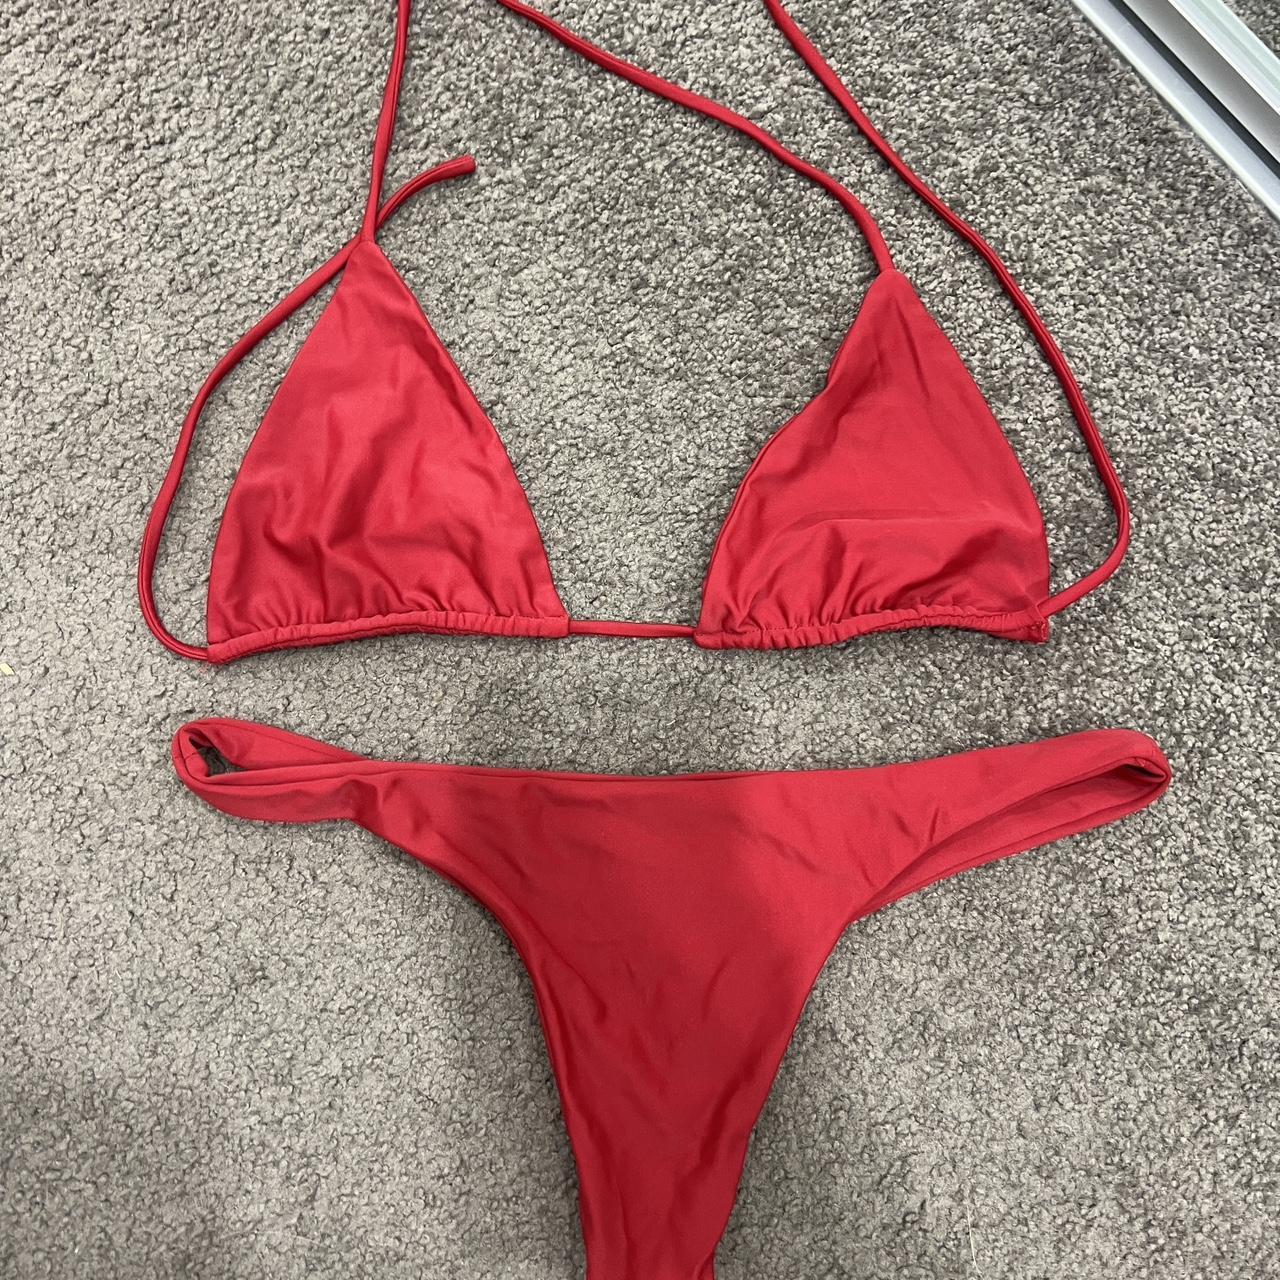 Declined 13+ offers on this so please don’t waste... - Depop